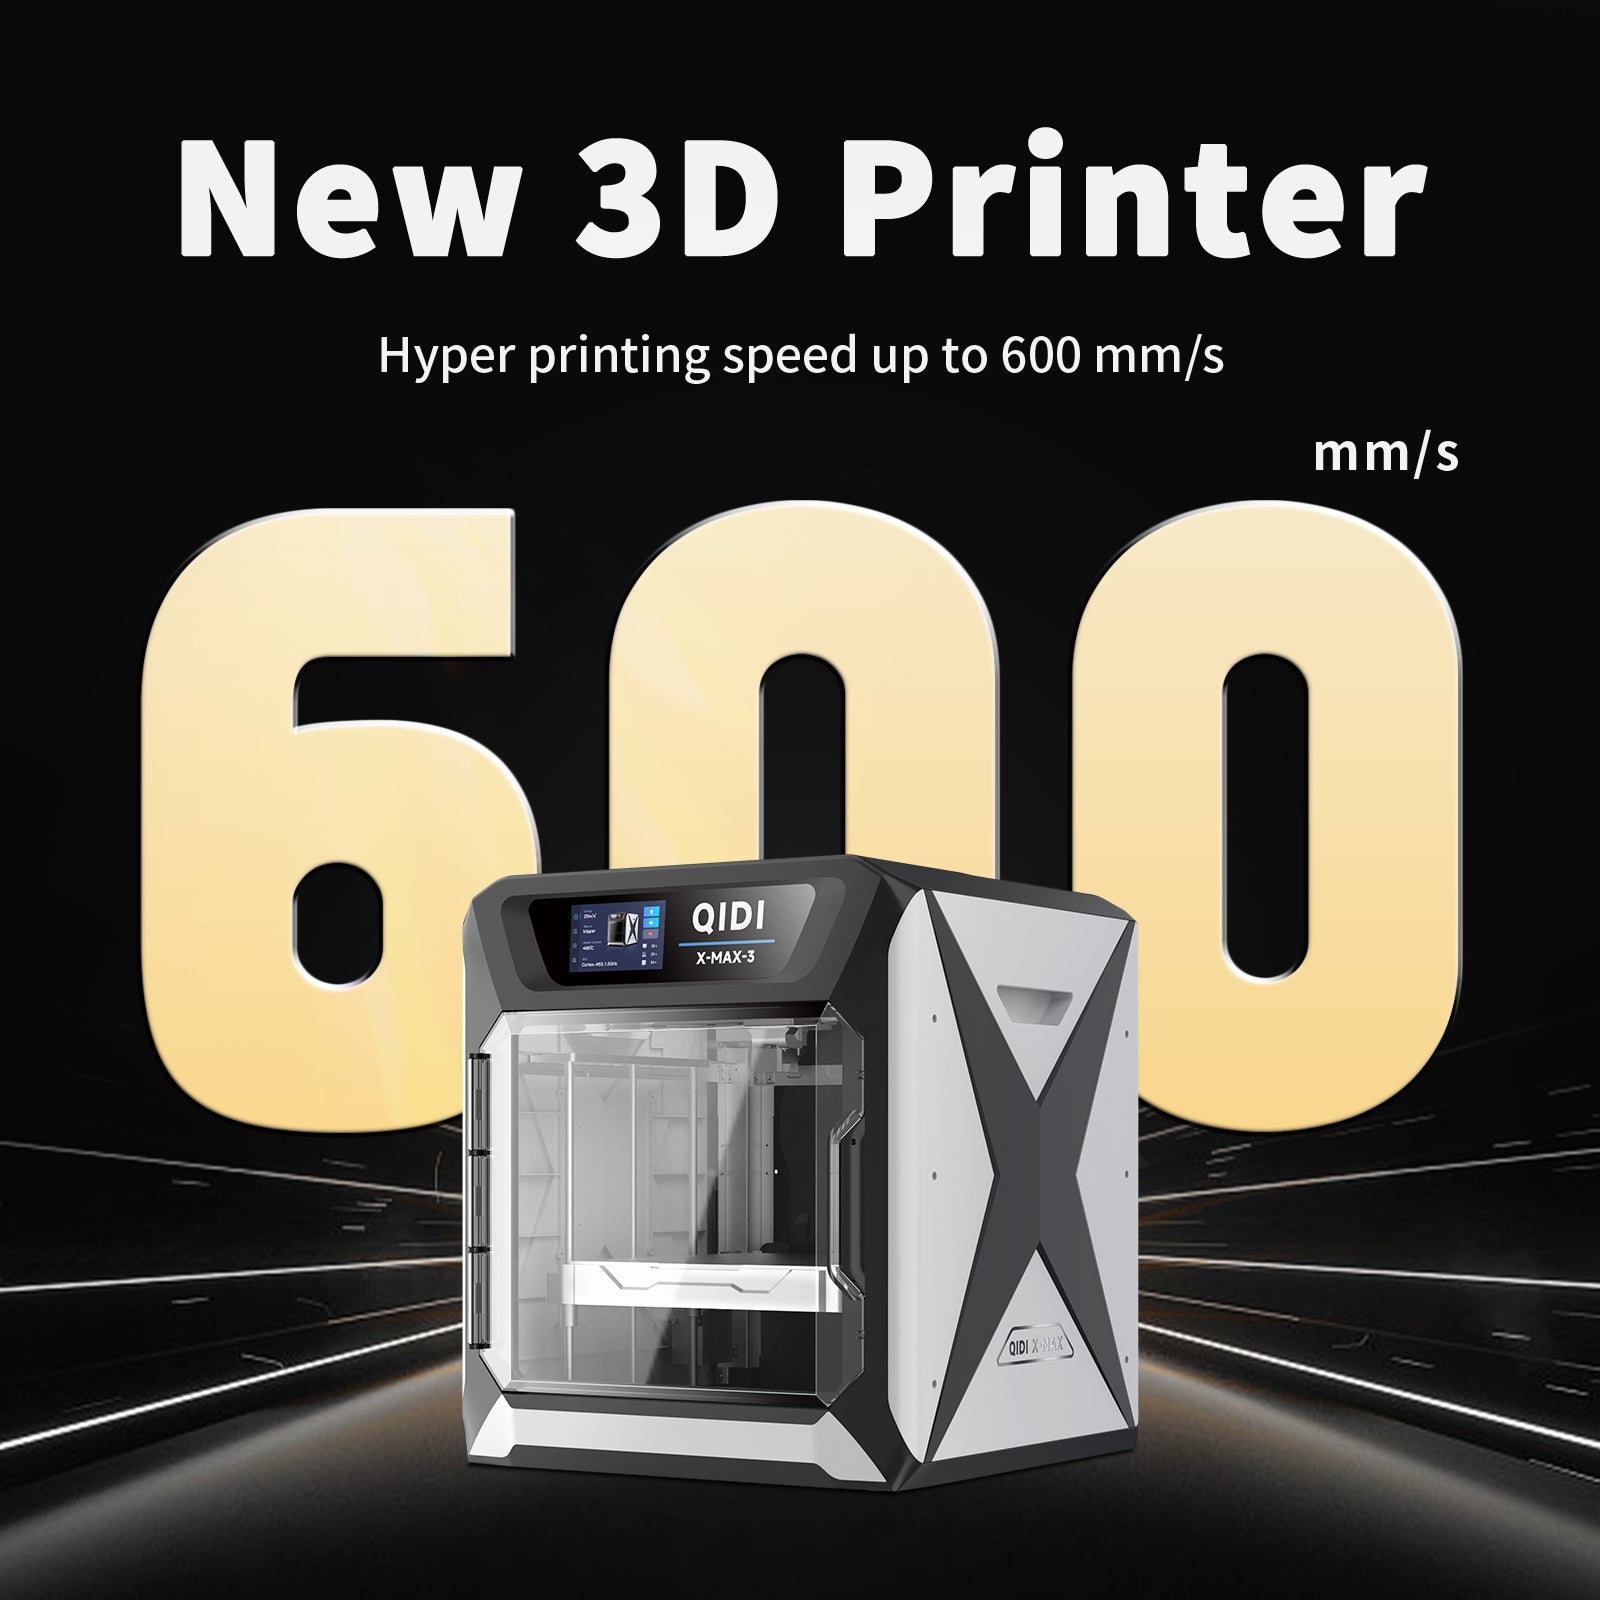 A fast 3D printer with hyper printing speed up to 600 mm/s